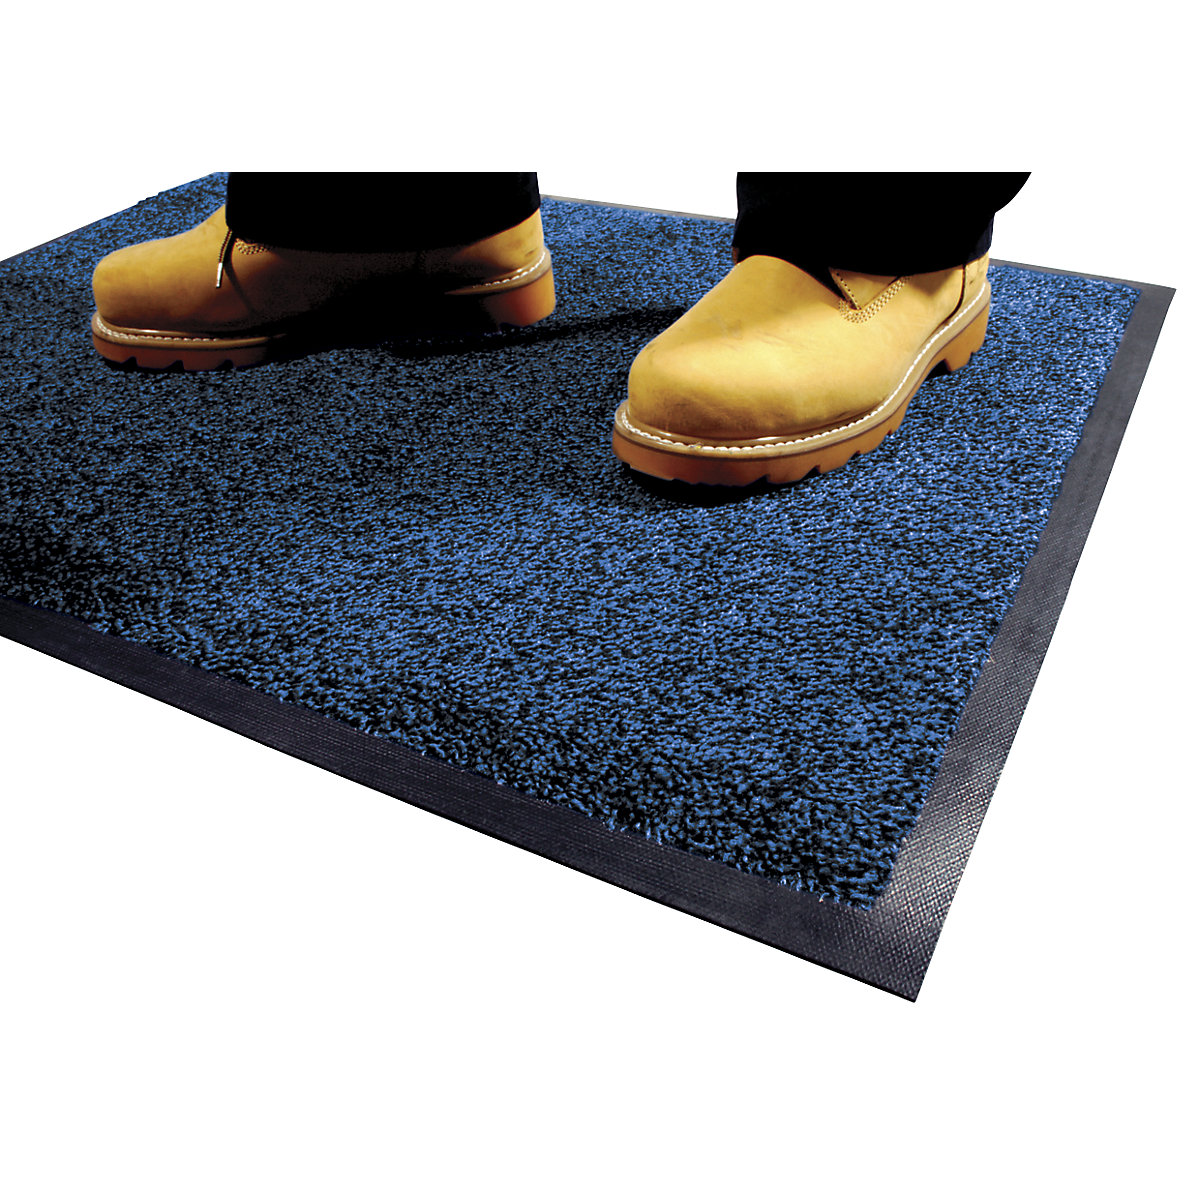 Entrance matting for indoor use, nylon pile, LxW 850 x 600 mm, pack of 2, blue